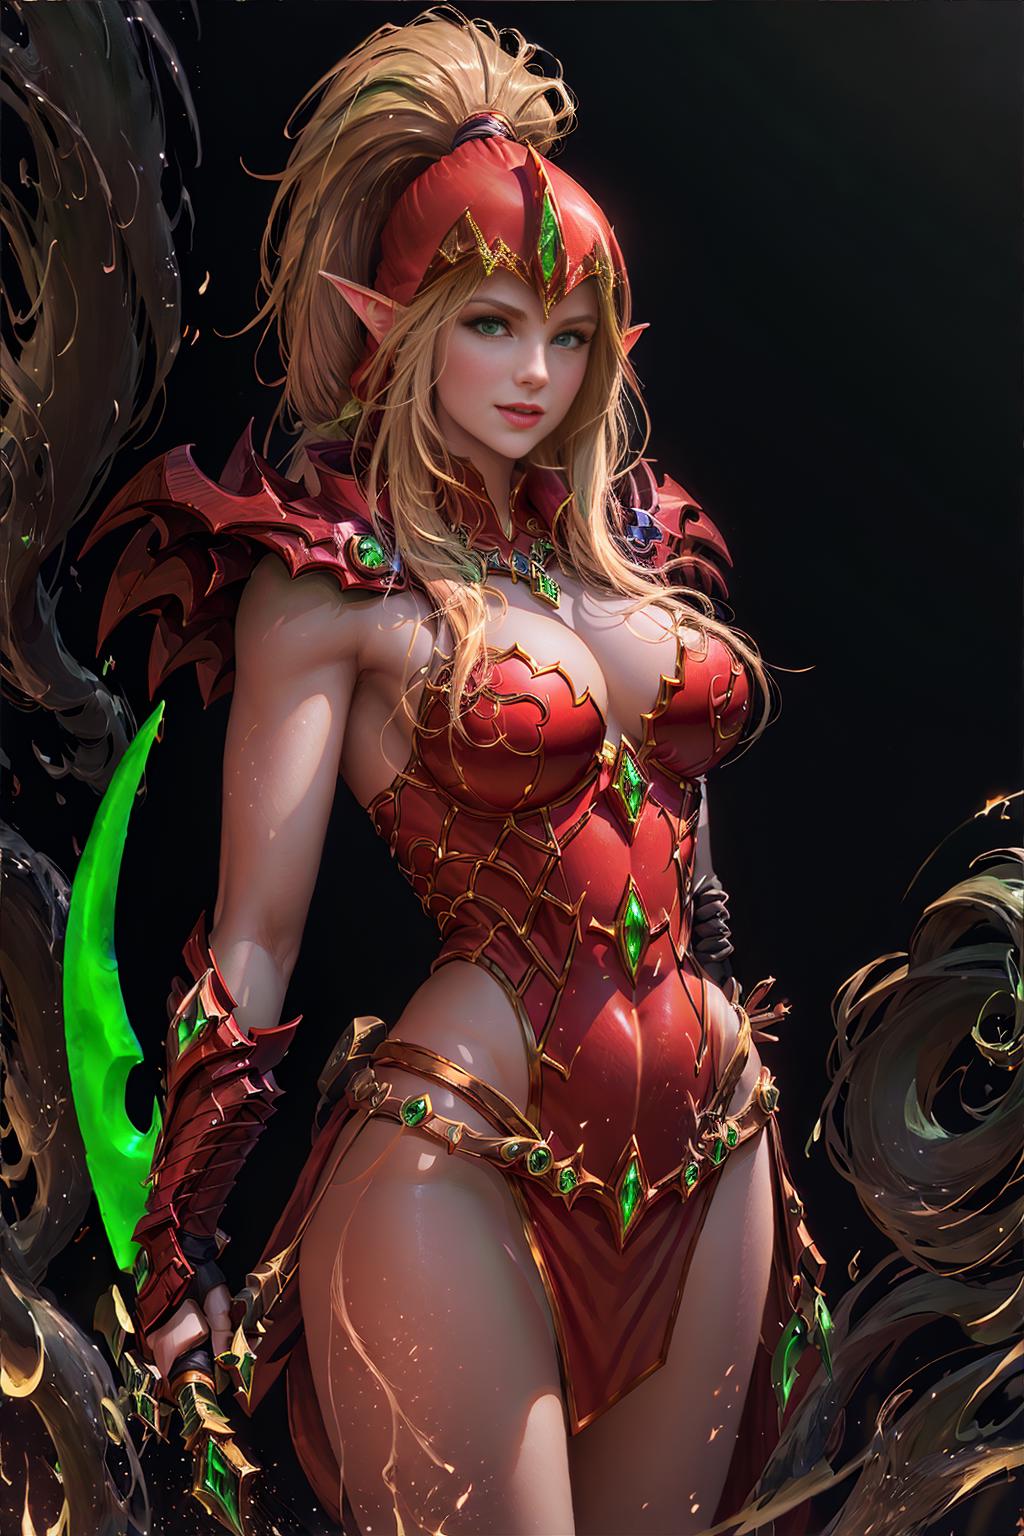 SC_World of Warcraft_Valeera Sanguinar image by SONGCHAO421